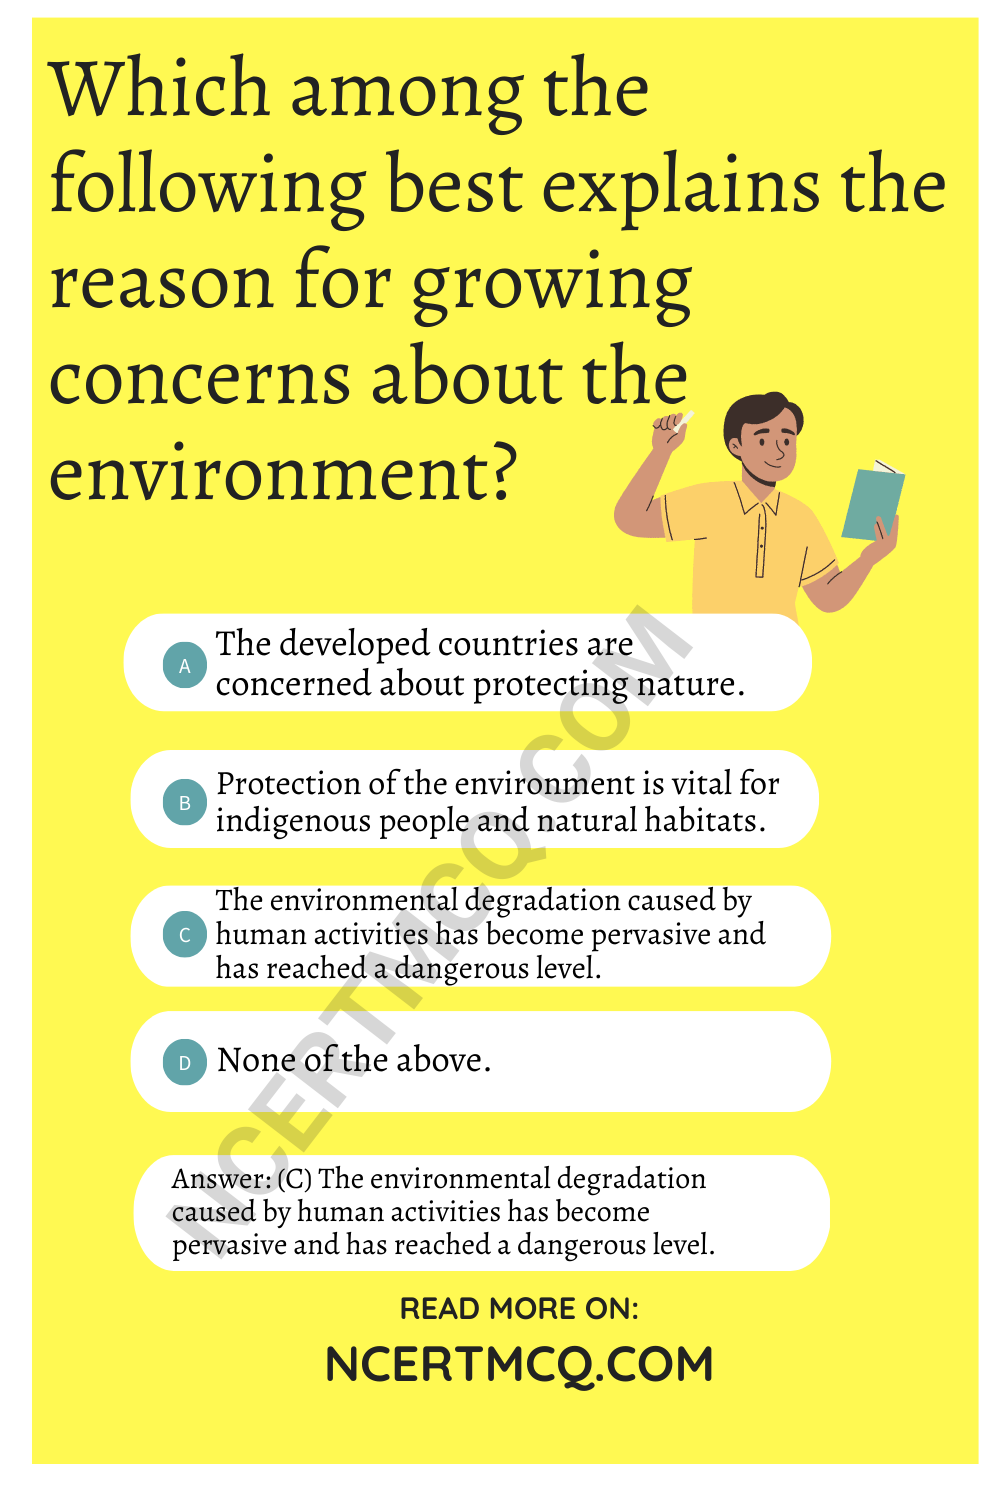 Which among the following best explains the reason for growing concerns about the environment?